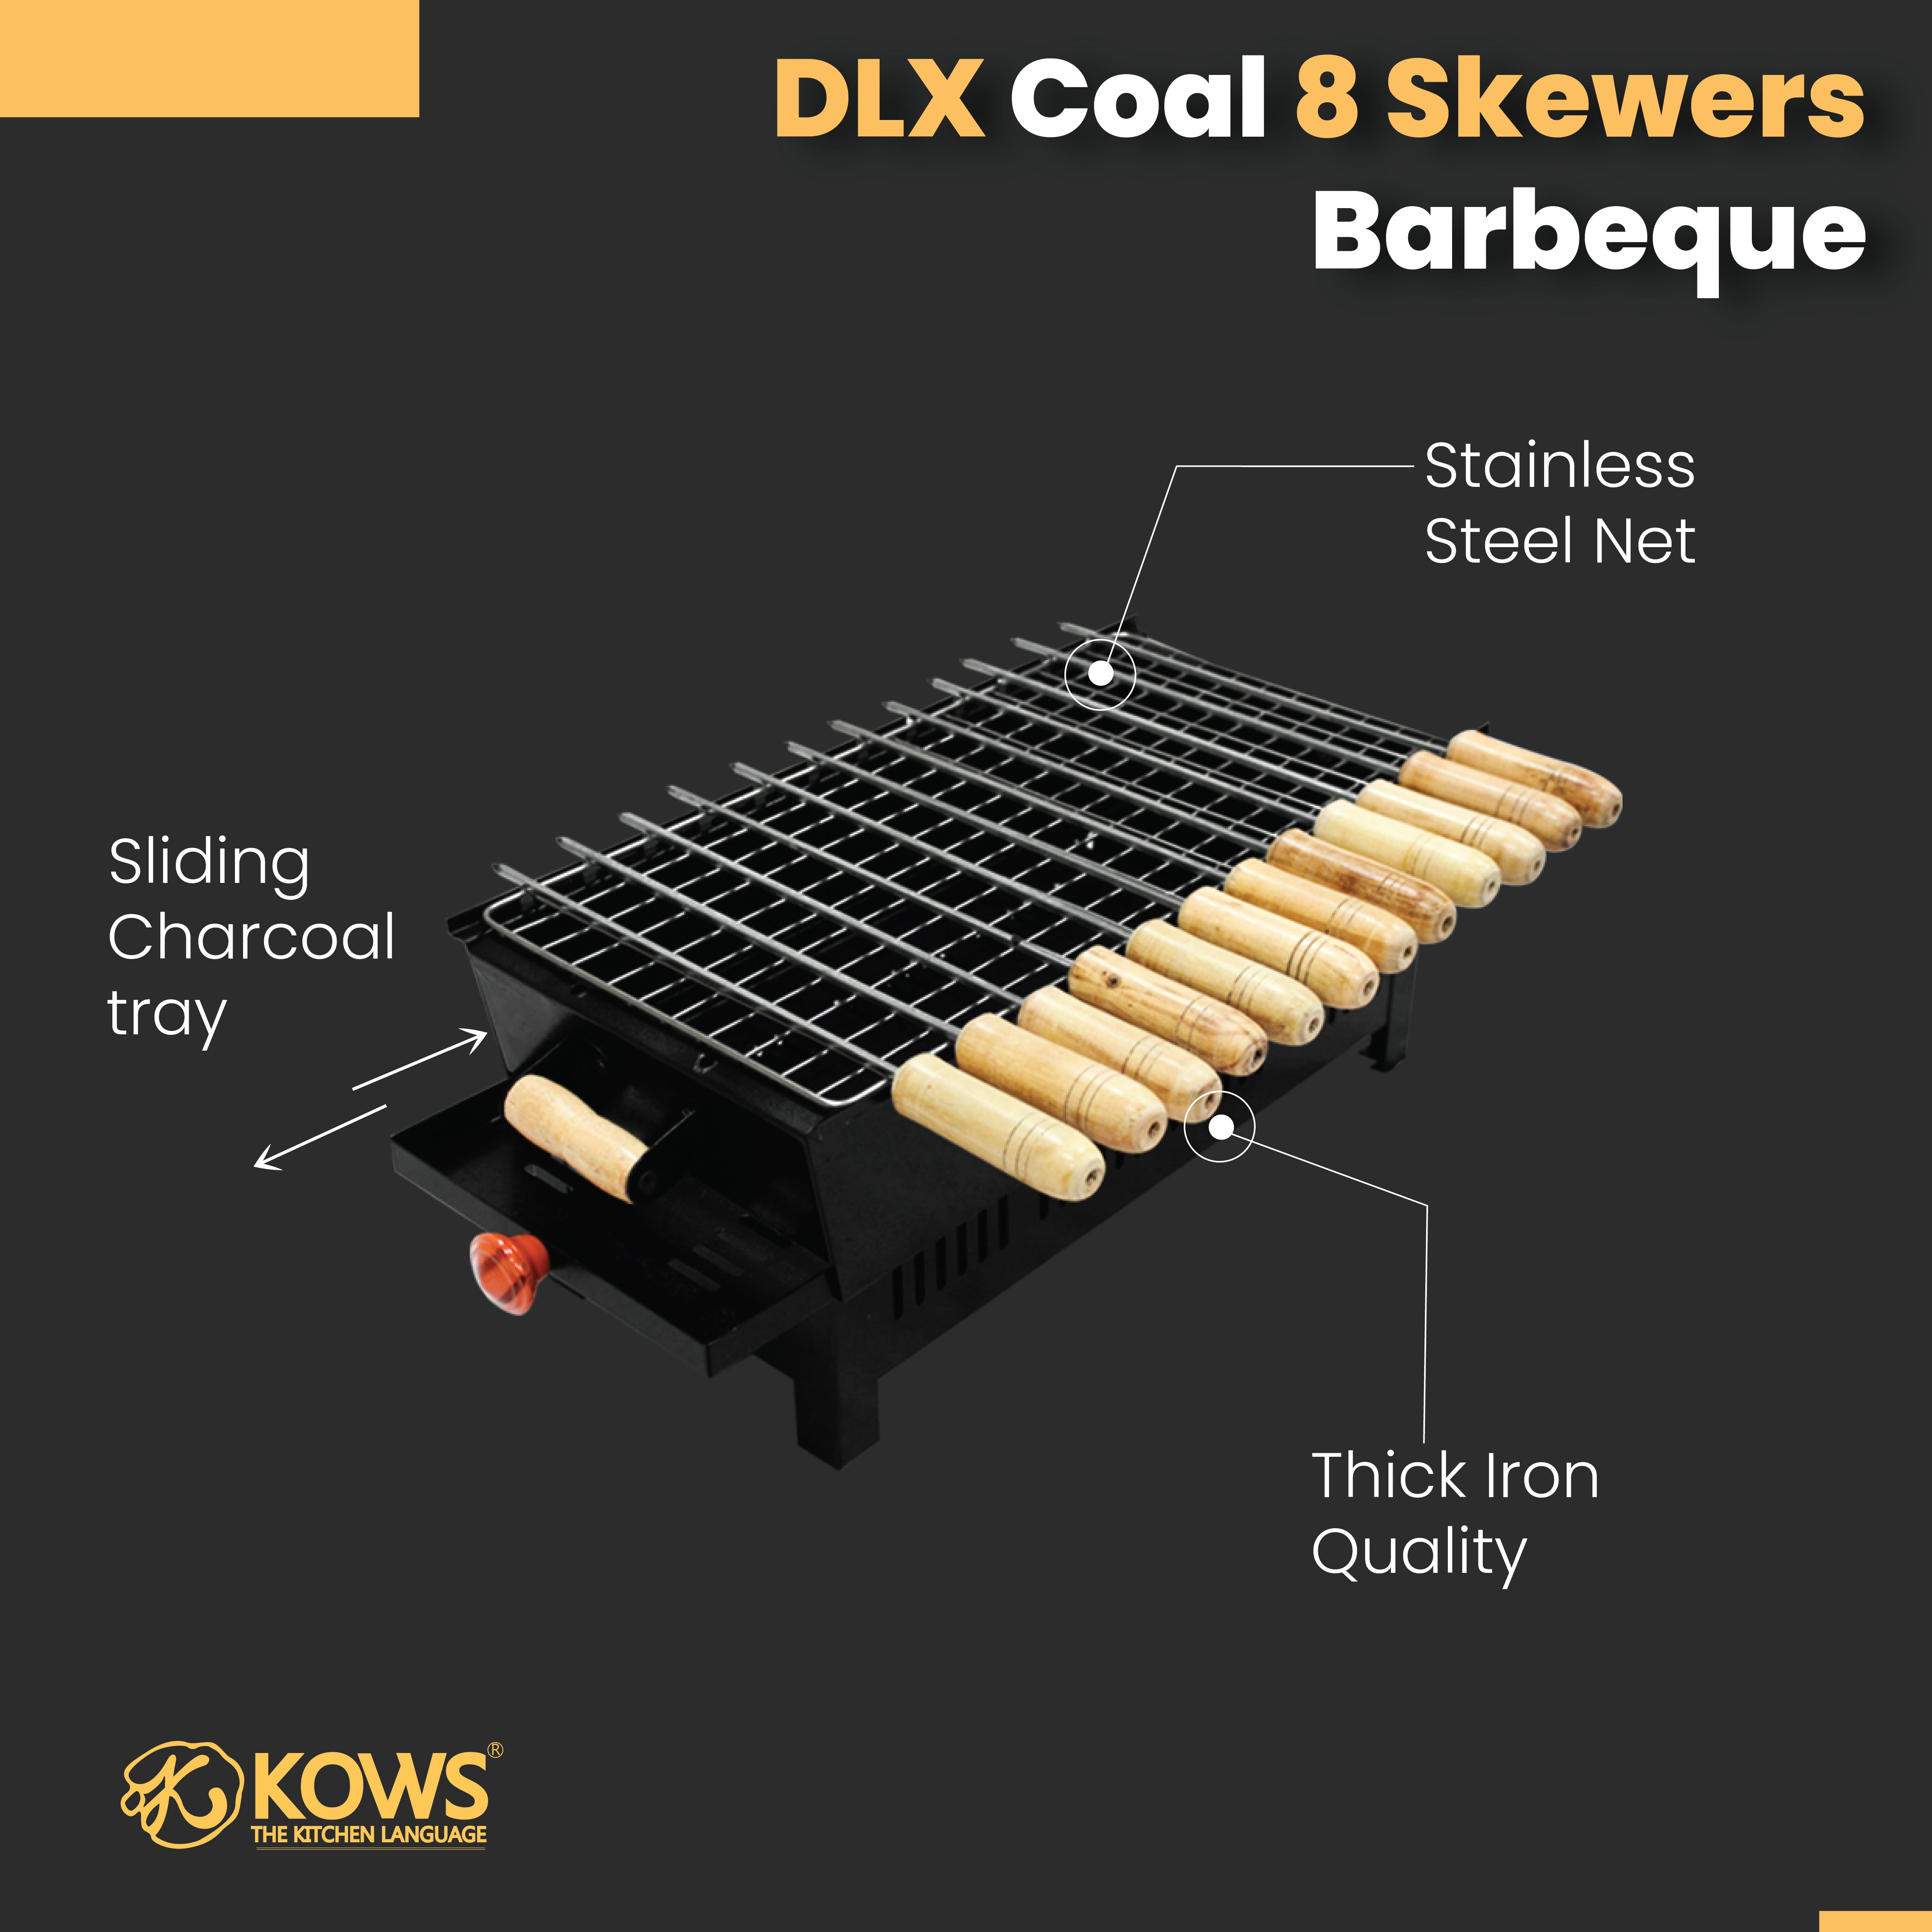 KOWS 12 skewer delux coal barbeque (BBQ006)